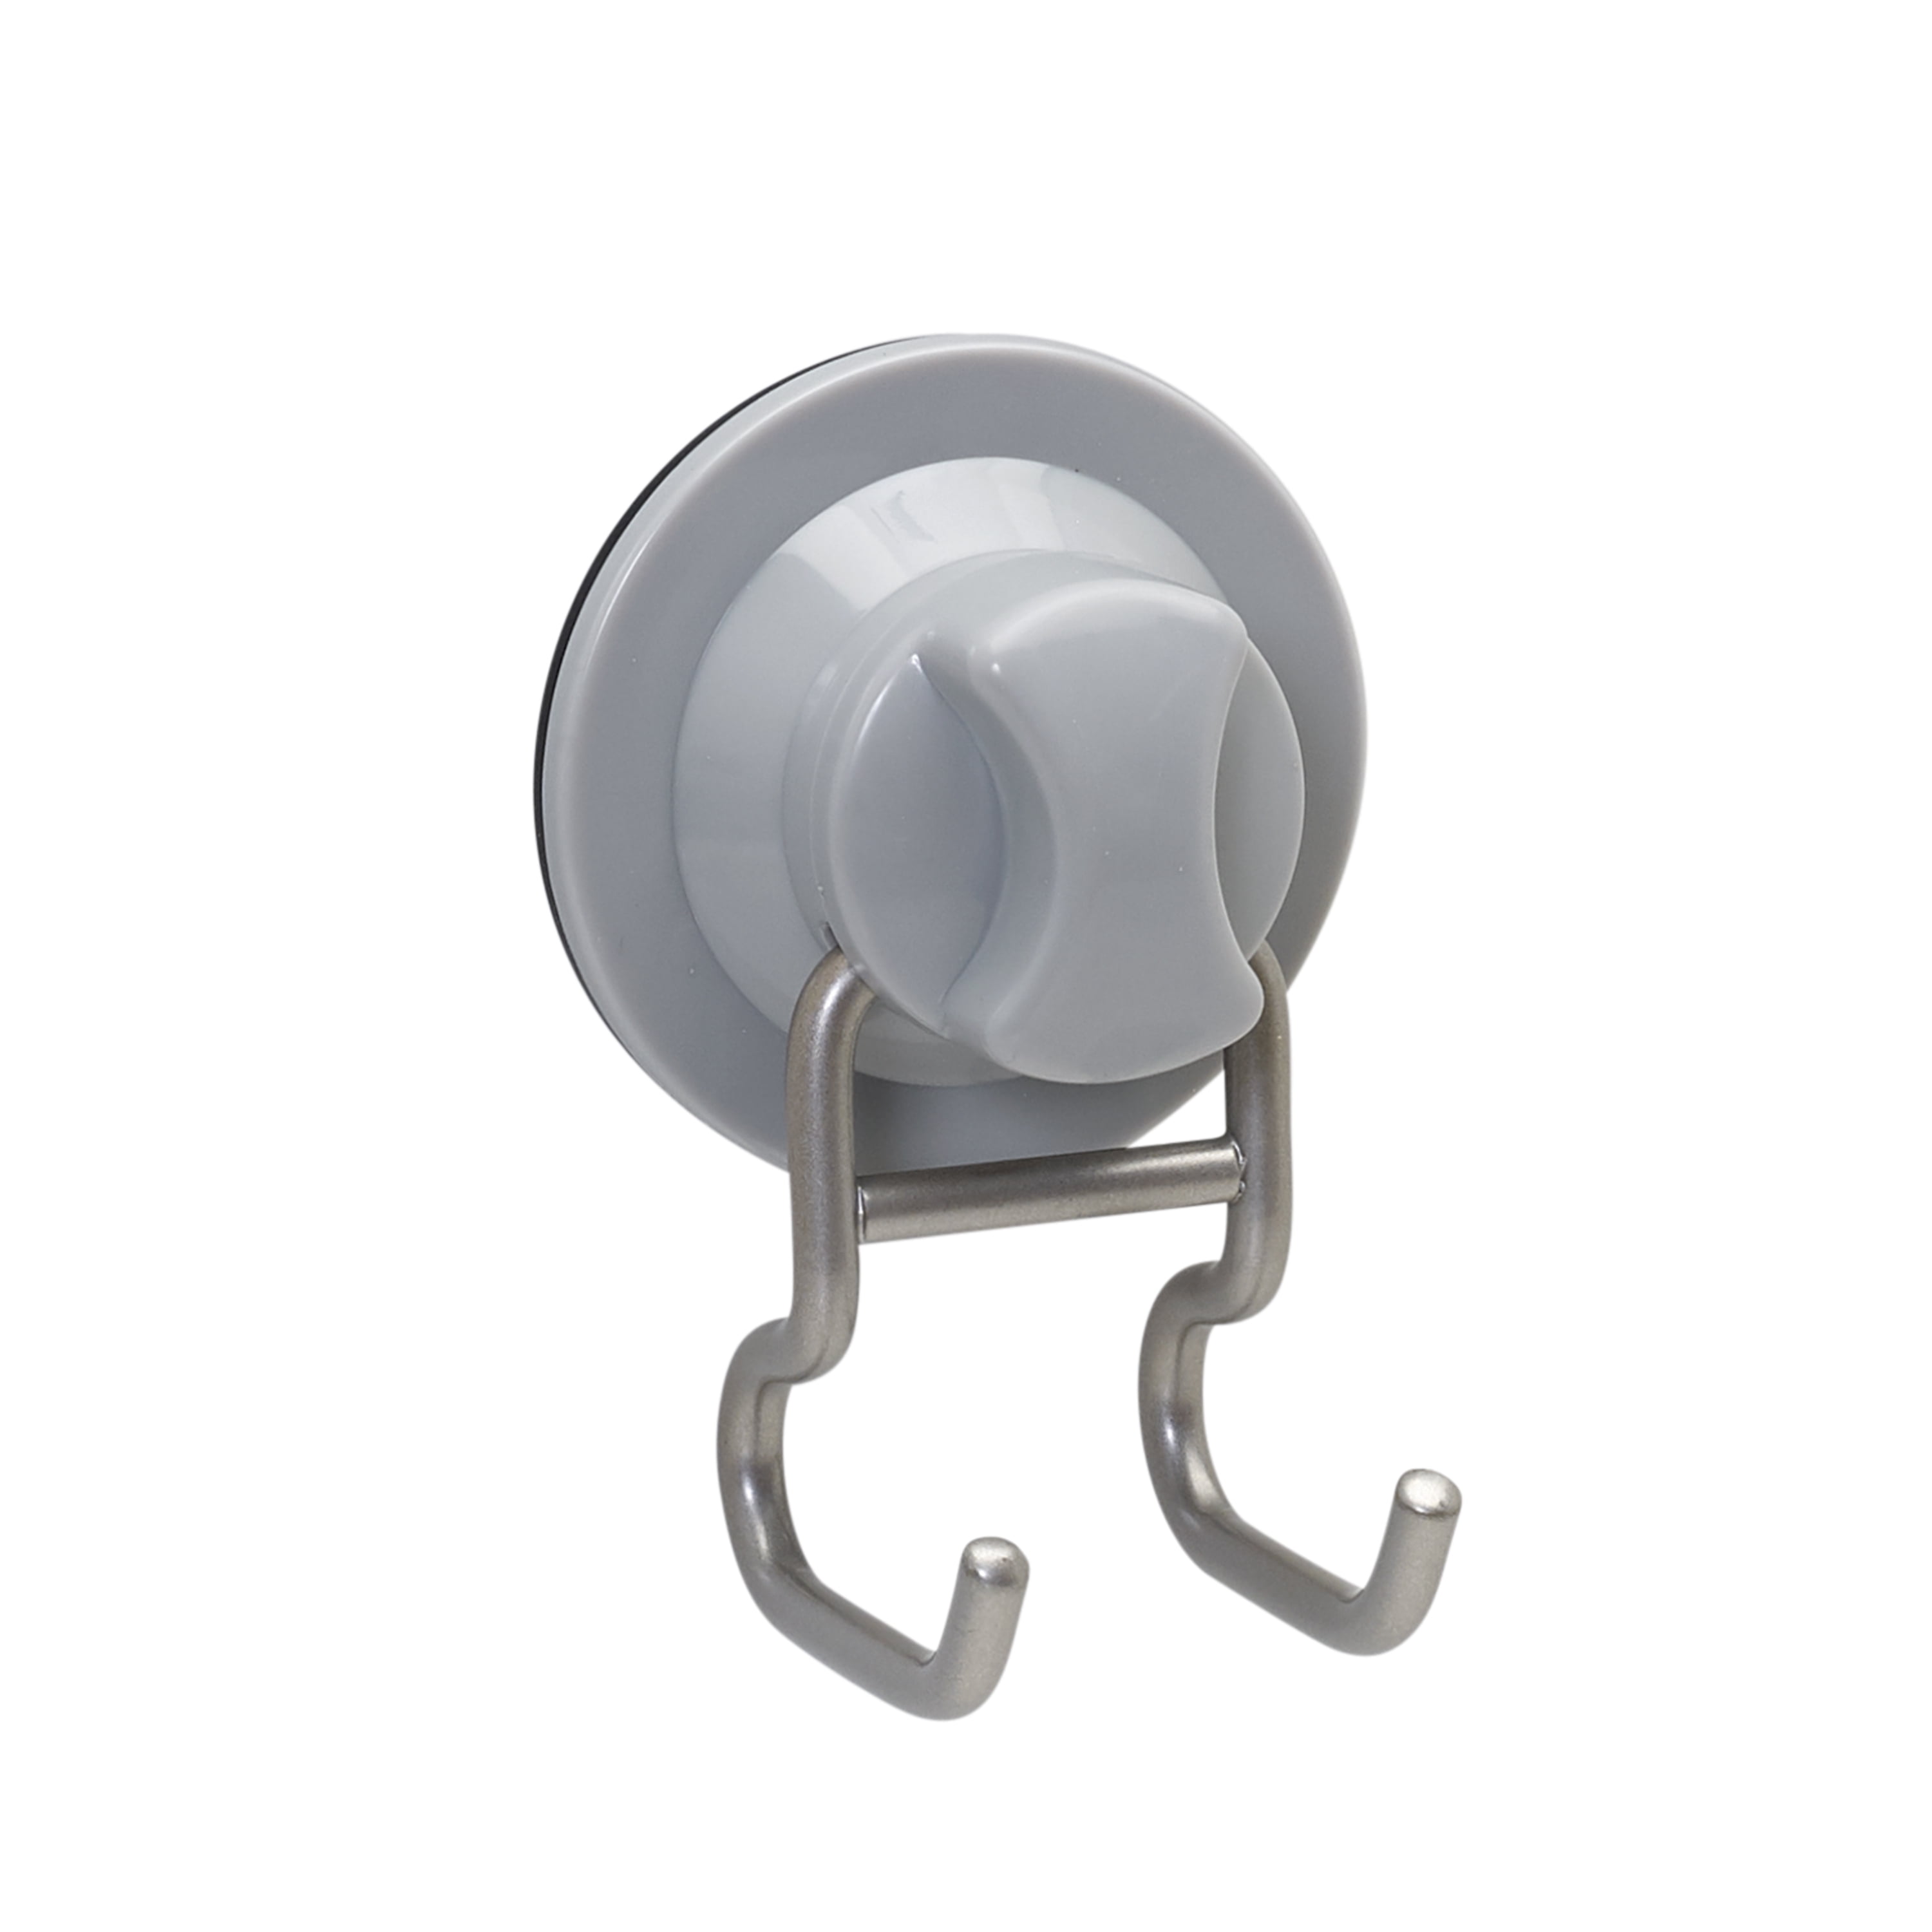 Better Homes & Gardens Dual Hook, Rust-Resistant, with Power Grip Pro Suction or Adhesive Mount, Satin Nickel